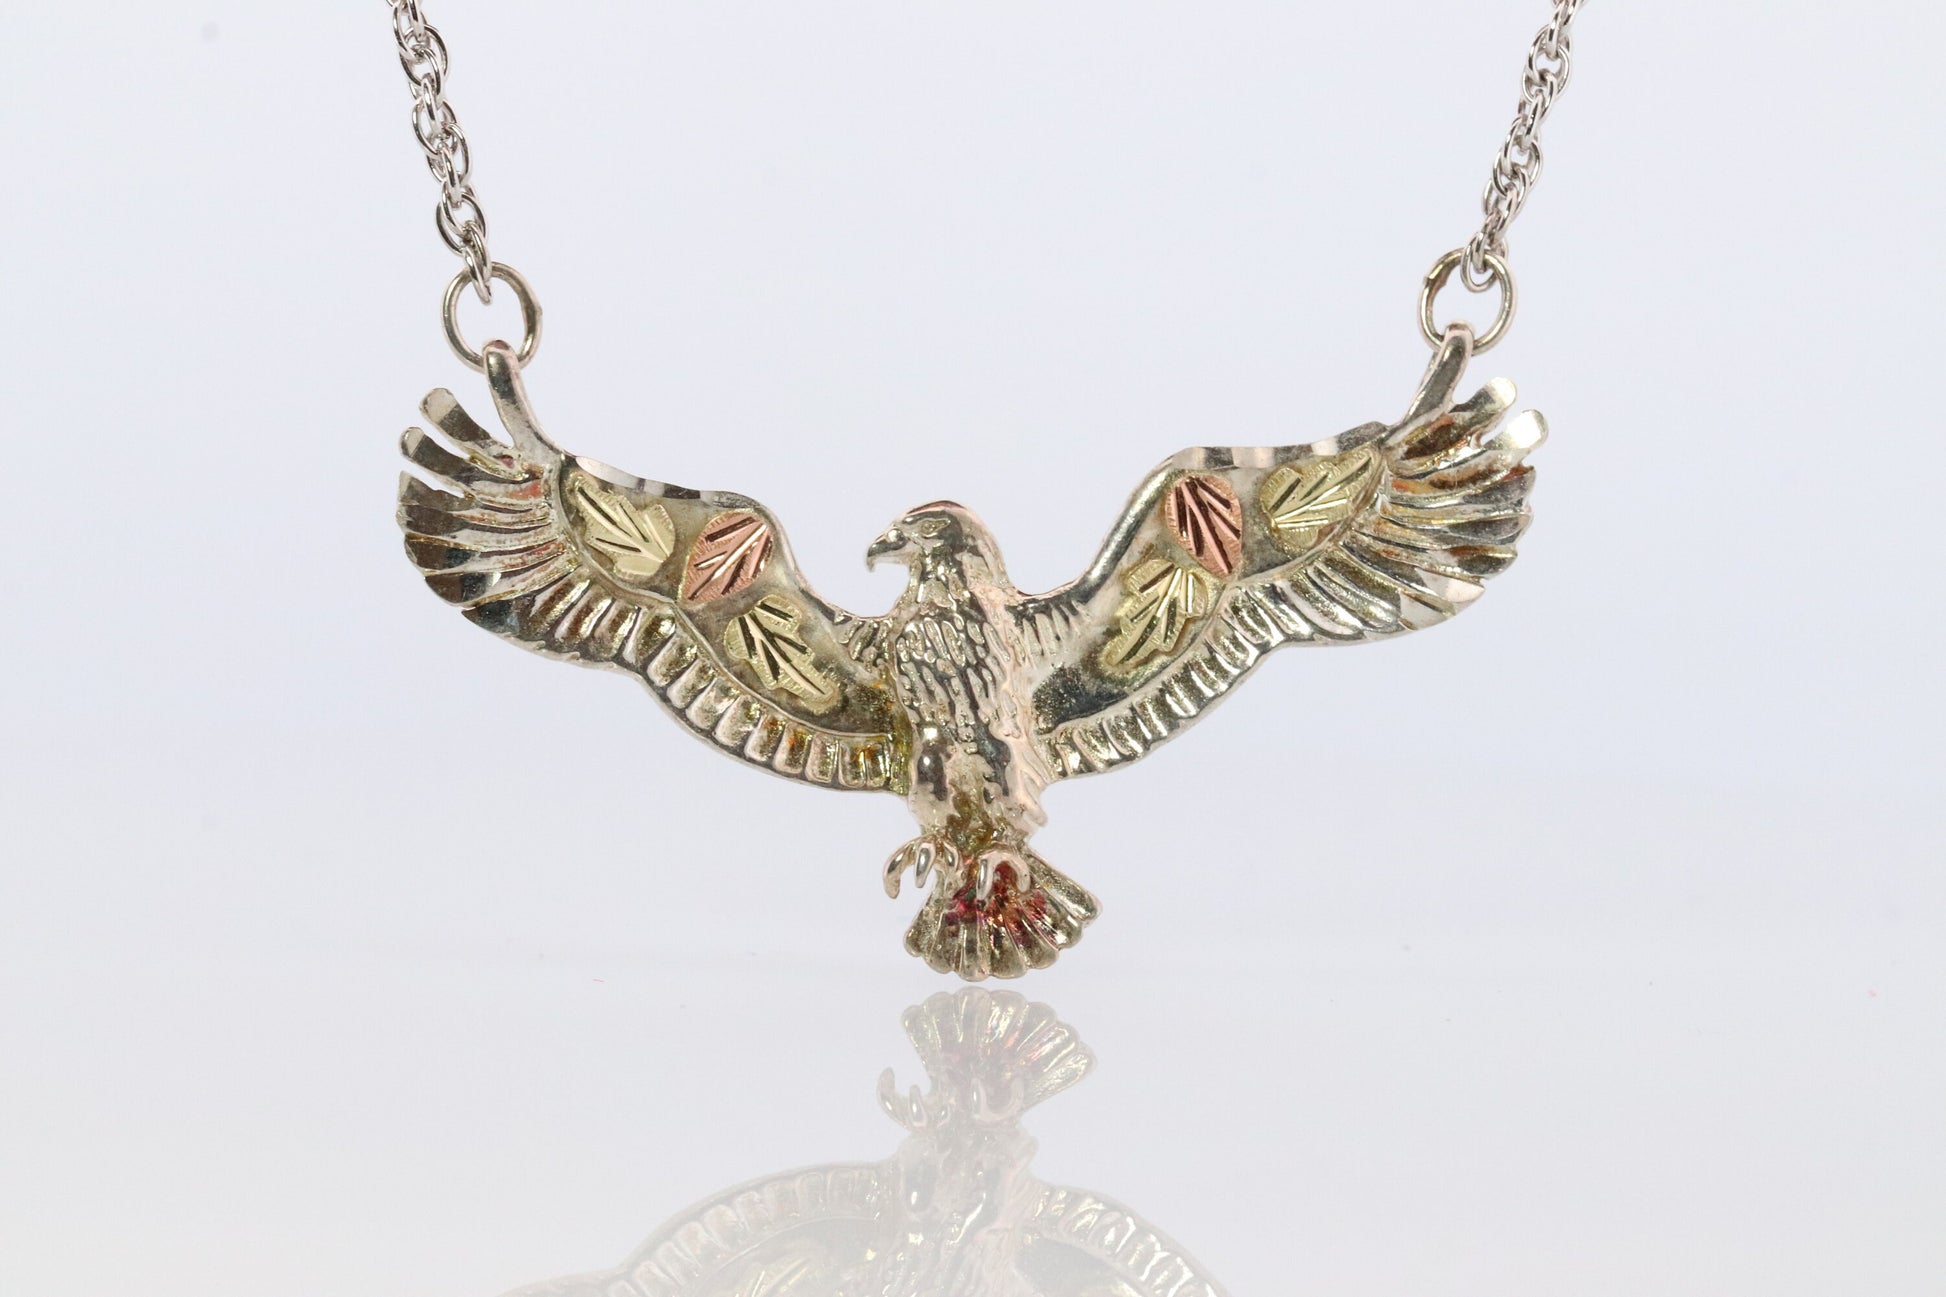 Black Hills Gold EAGLE Necklace. Heavy Vintage Sterling Silver and 12k/10k Pendant and Necklace made by Black Hills Gold.